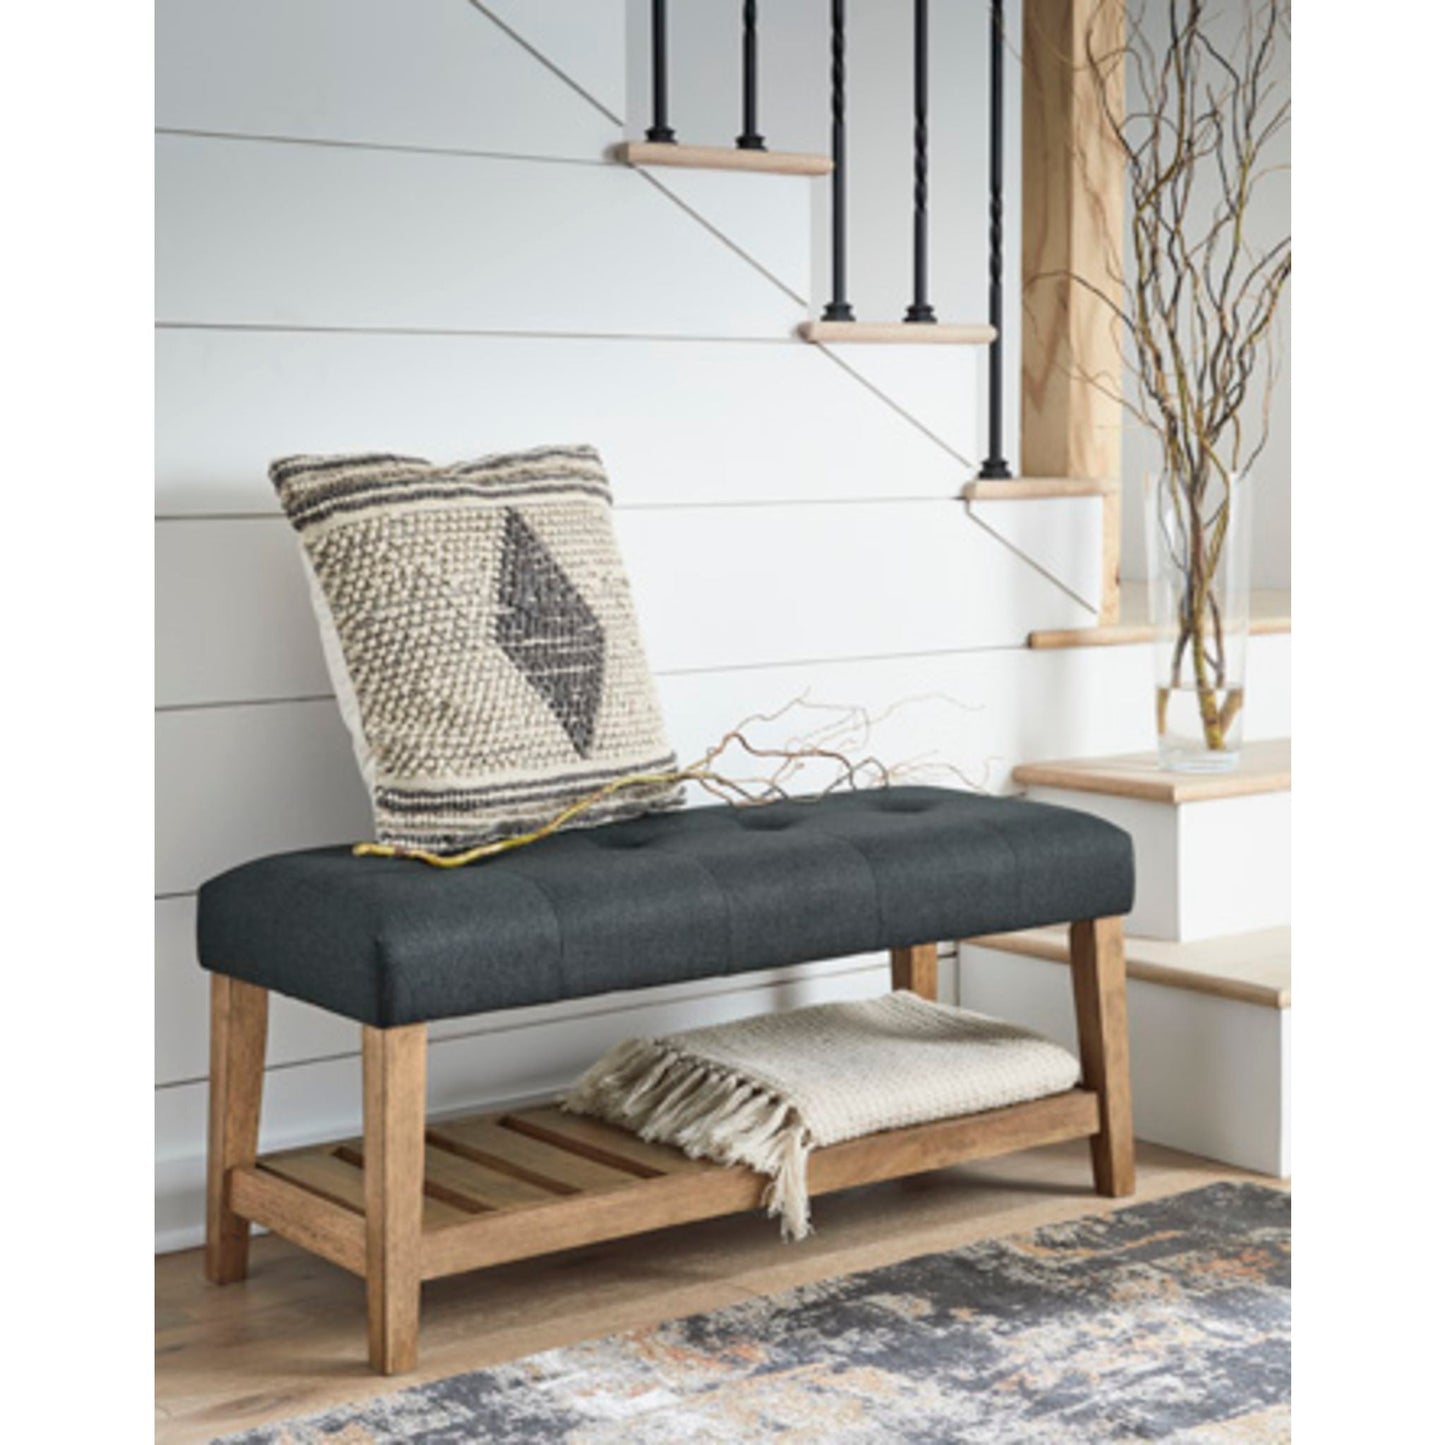 Cabellero Bench - Charcoal/Brown